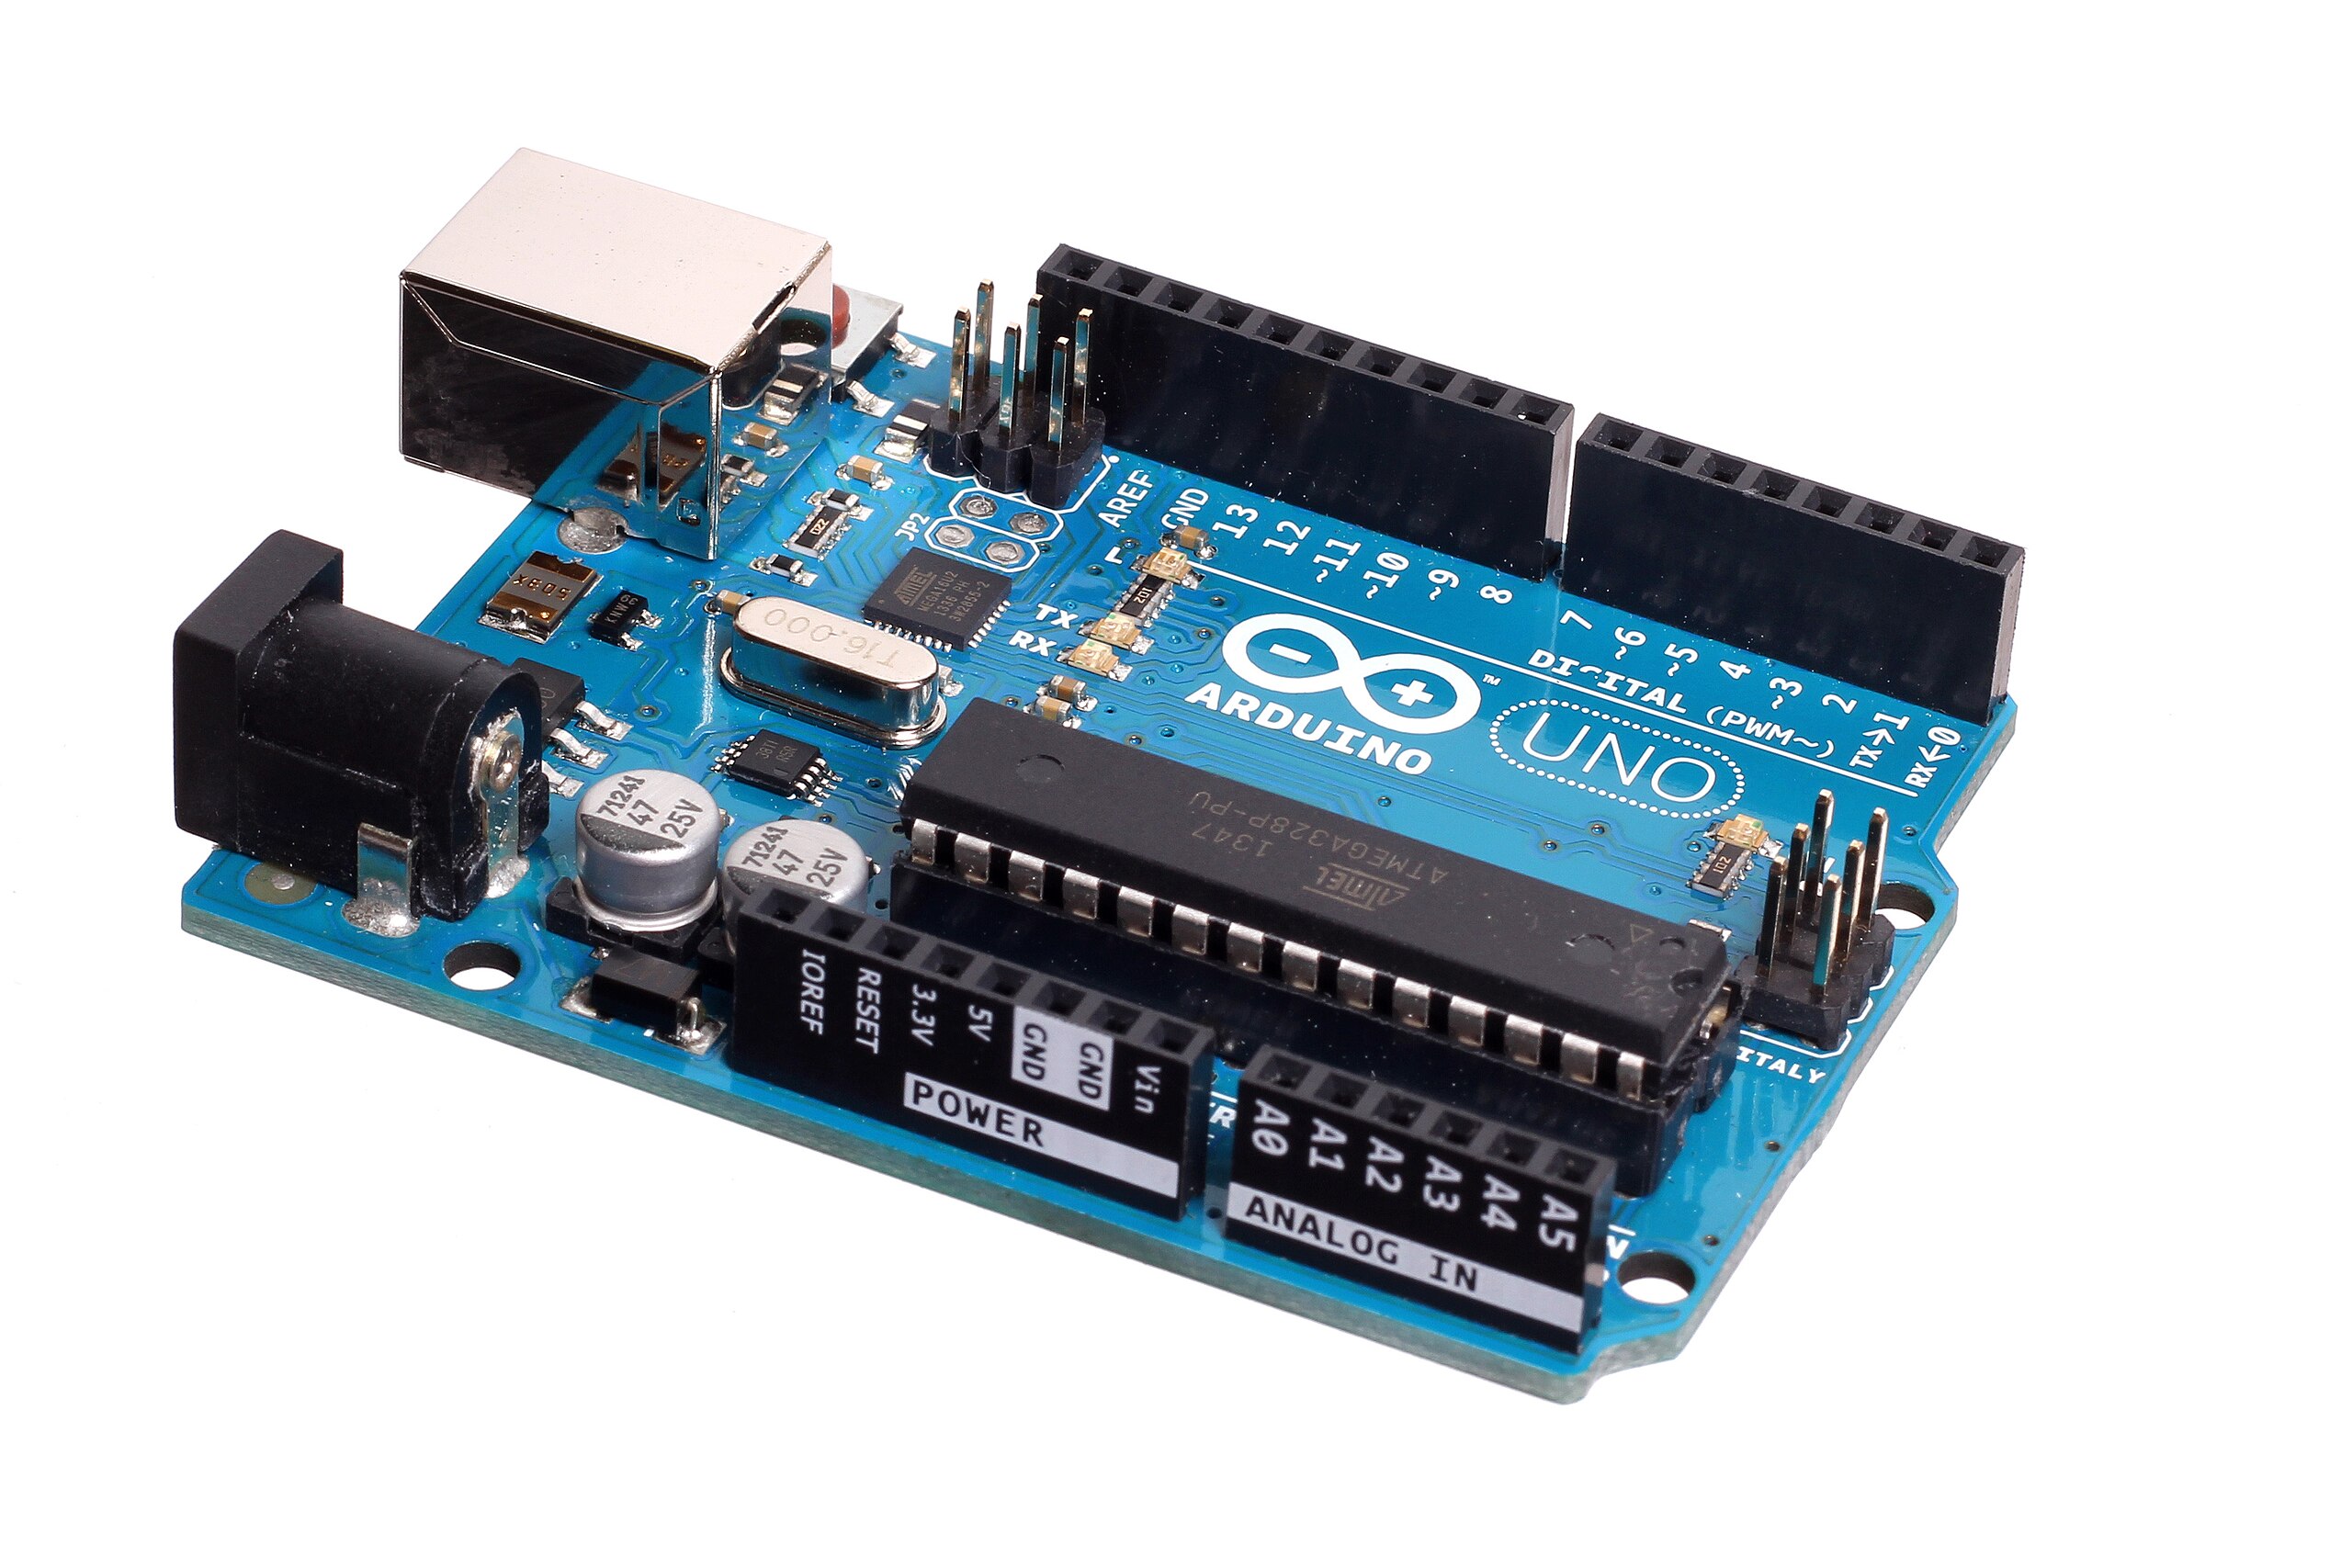 File:Arduino-uno-perspective-whitw.jpg - Wikimedia Commons